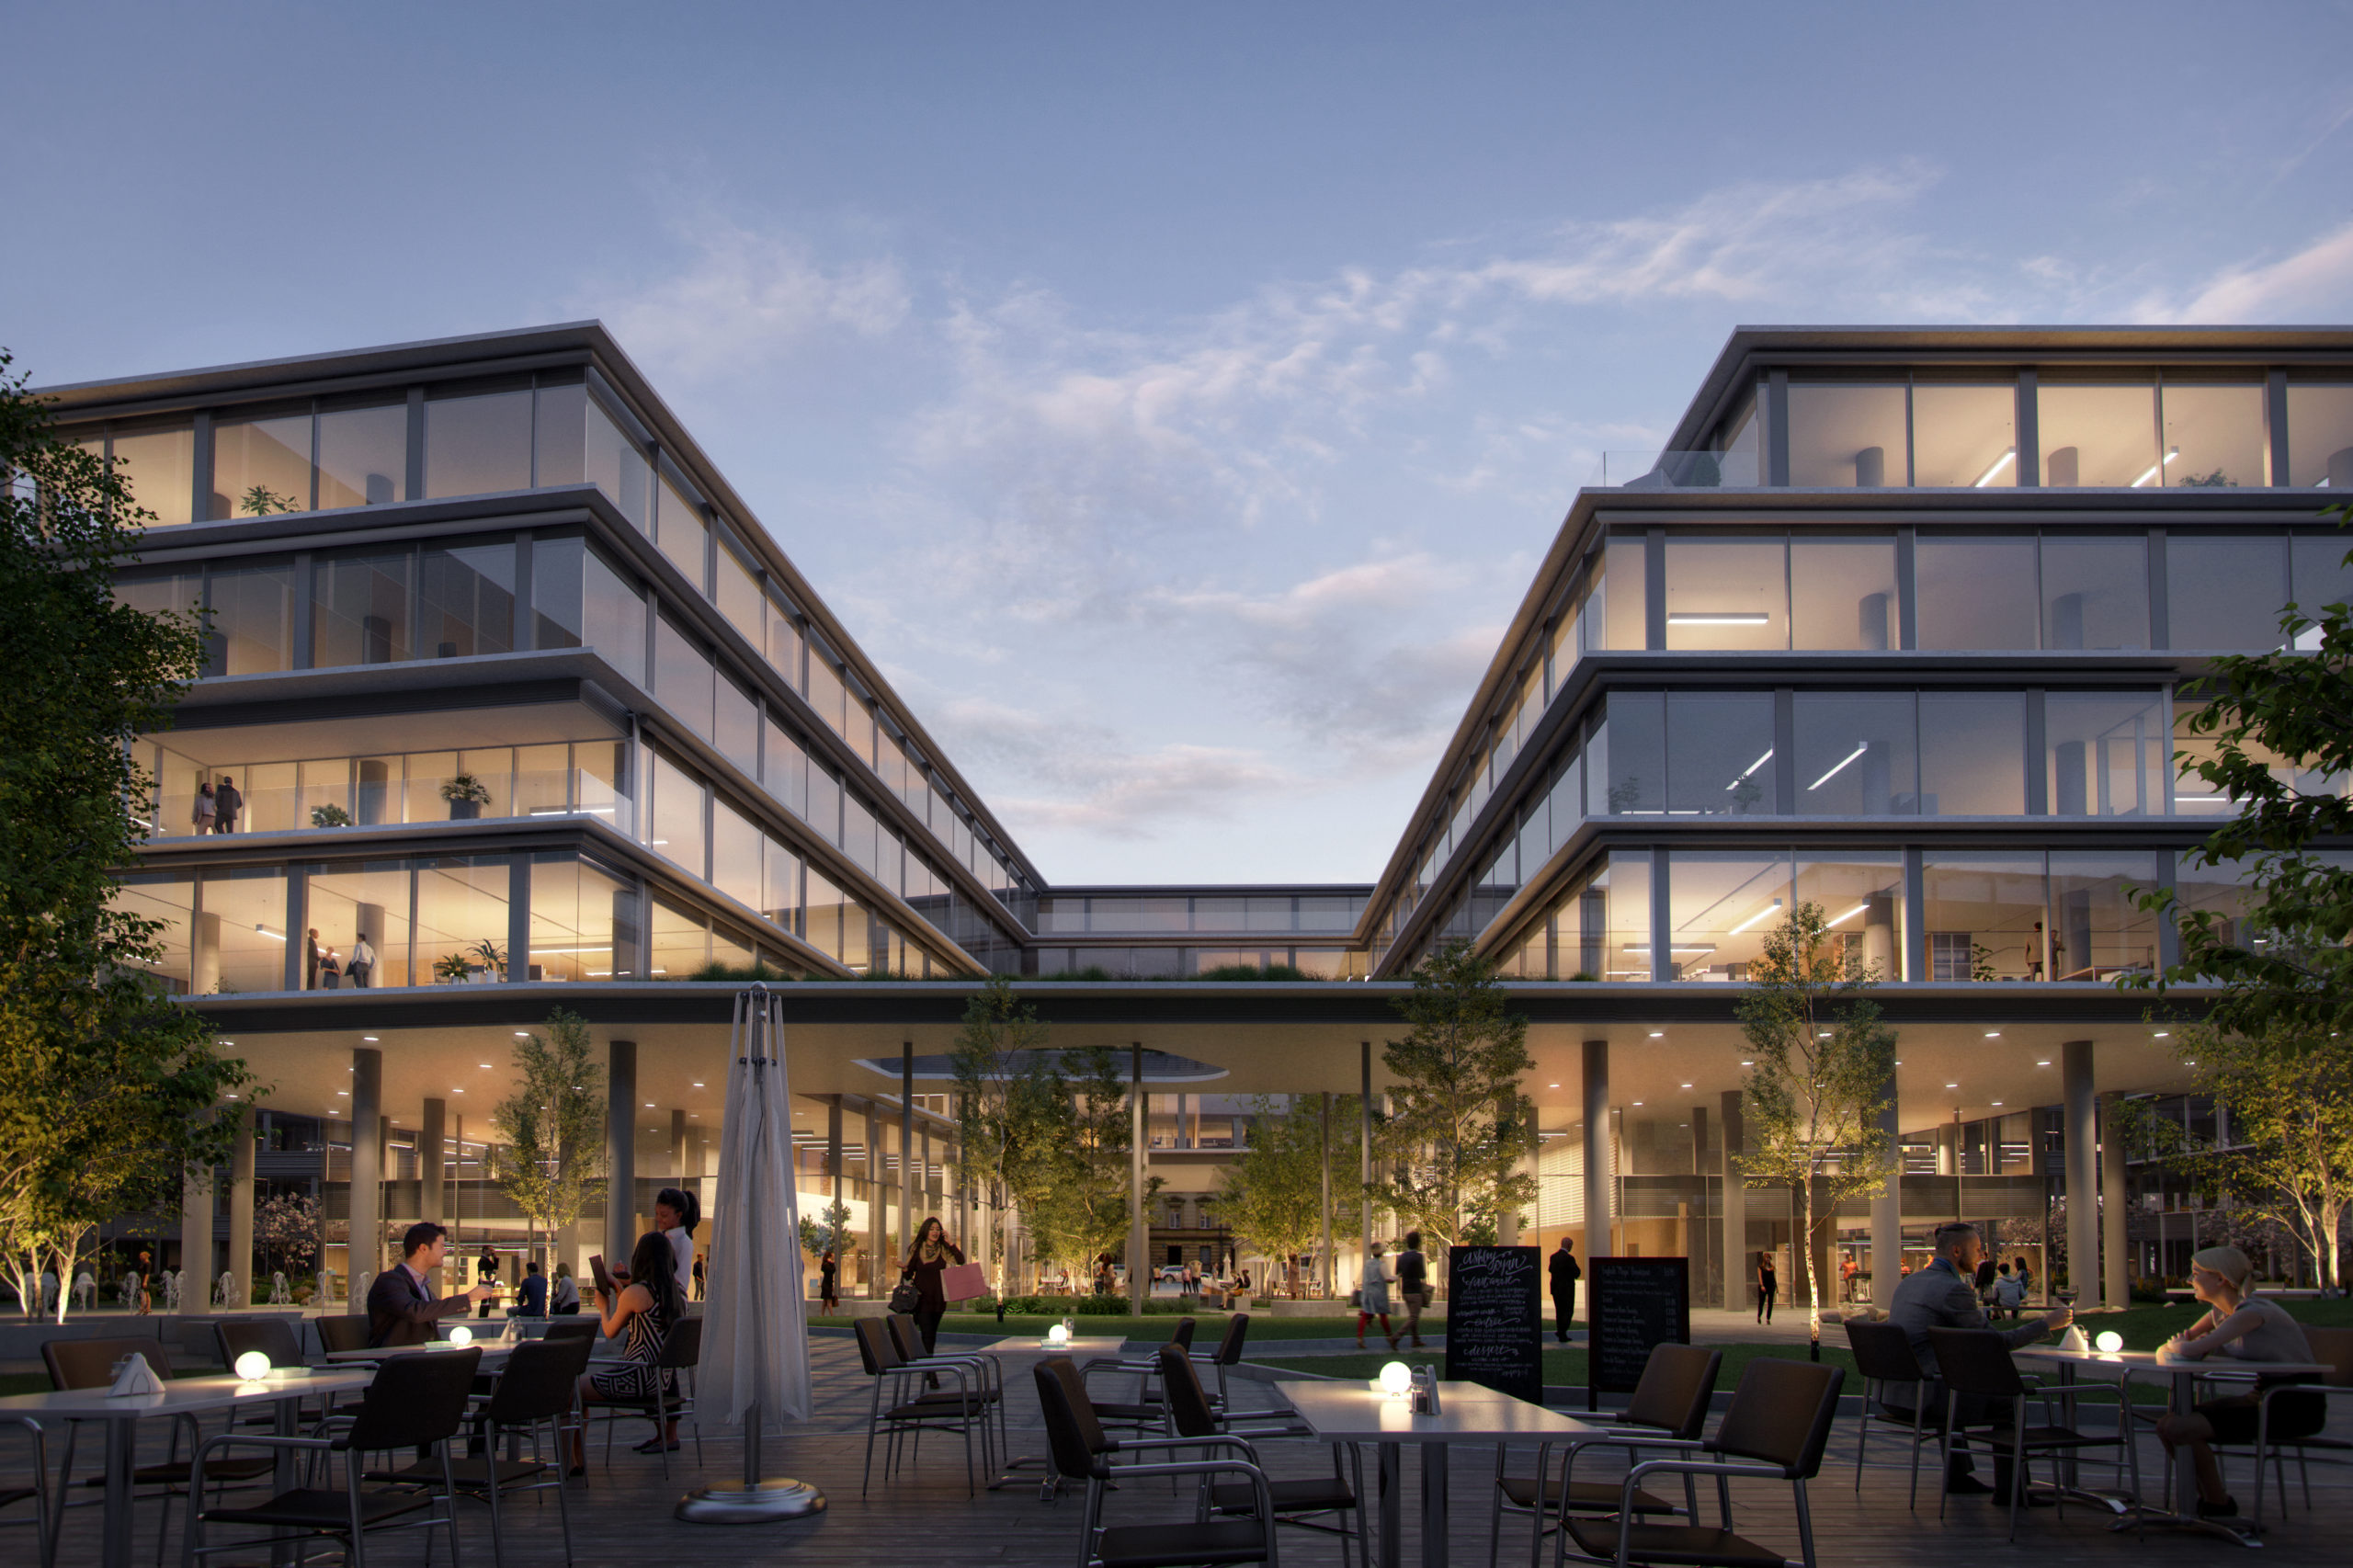 WING to launch HOP Passage, its latest office development project, in Hungária Office Park